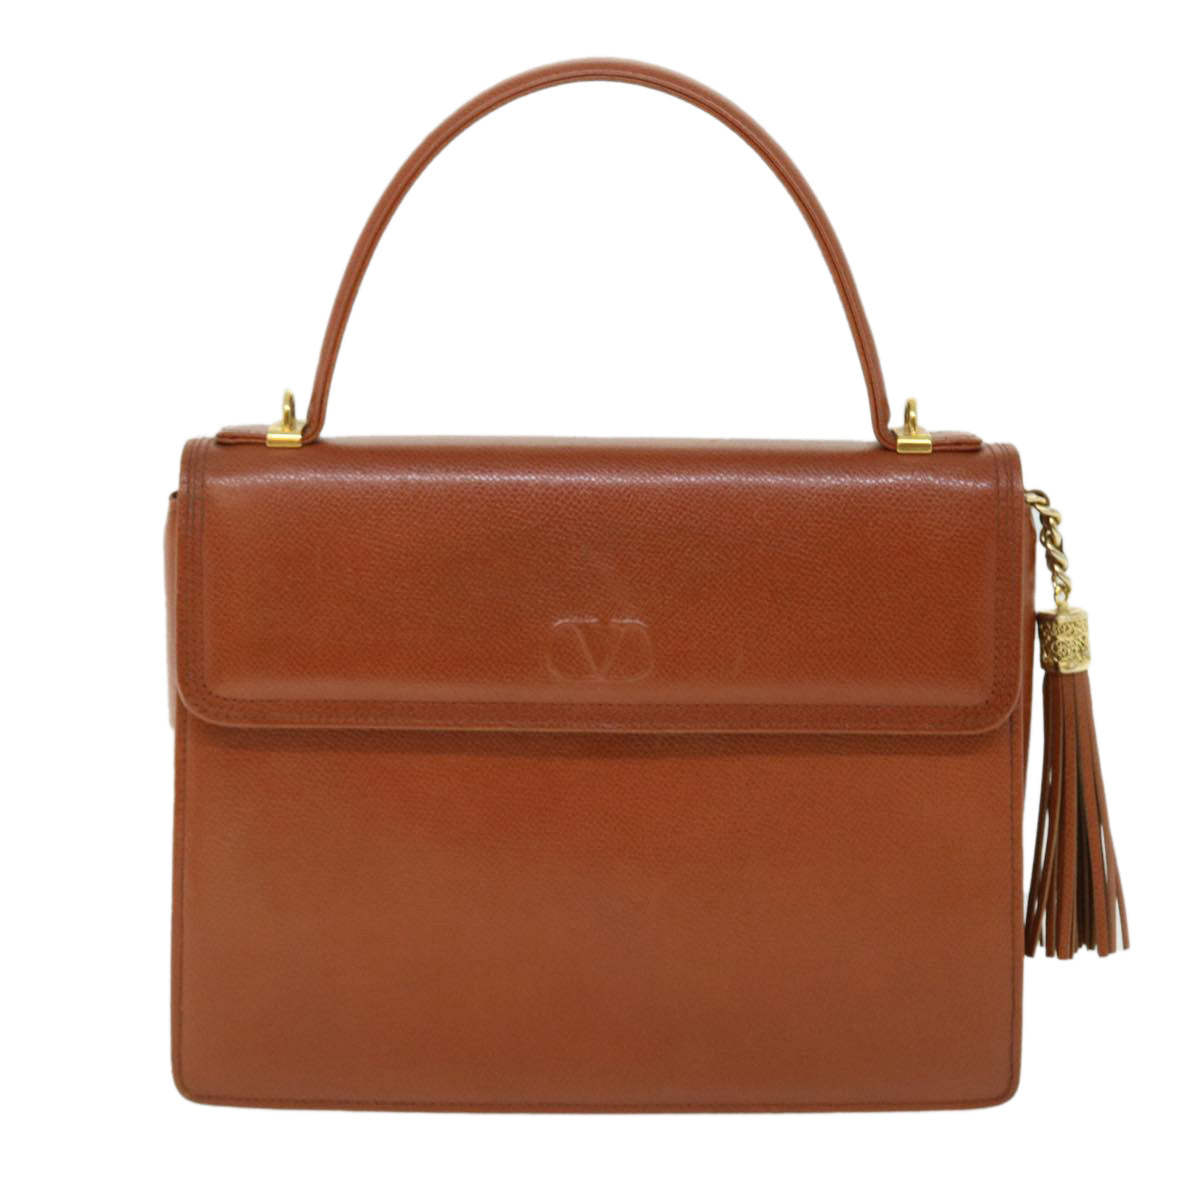 VALENTINO Hand Bag Leather 2way Brown Auth 52014